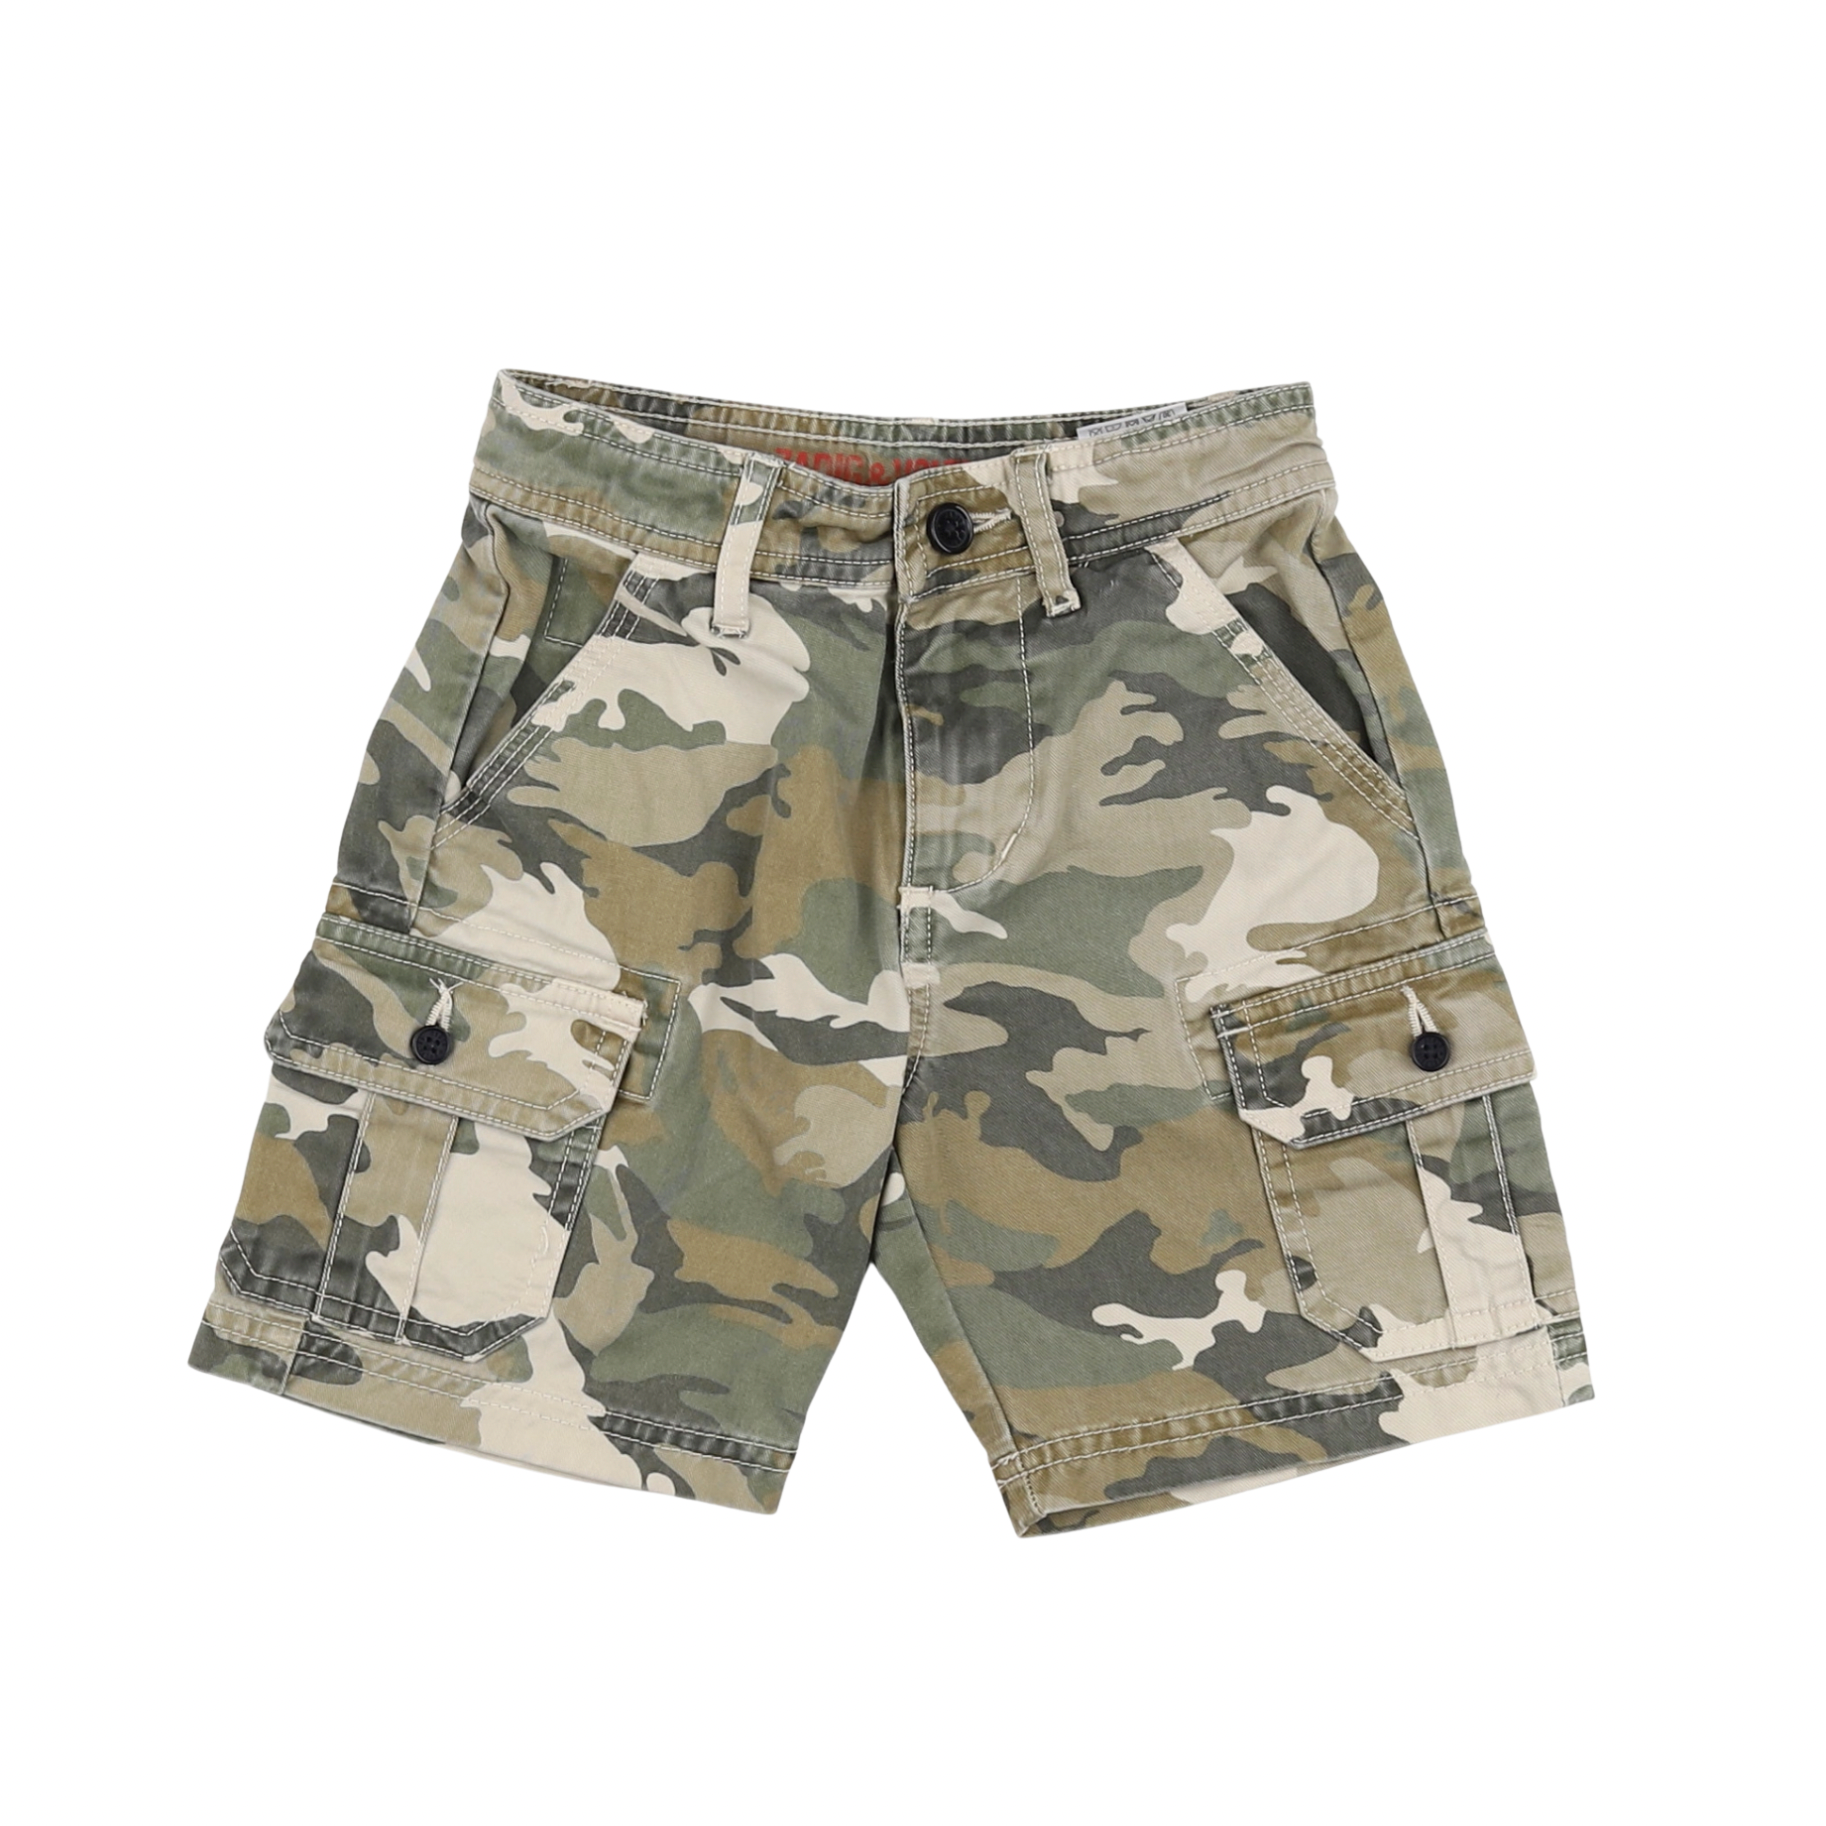 ZADIG &amp; VOLTAIRE - Camouflage shorts - 4 years old